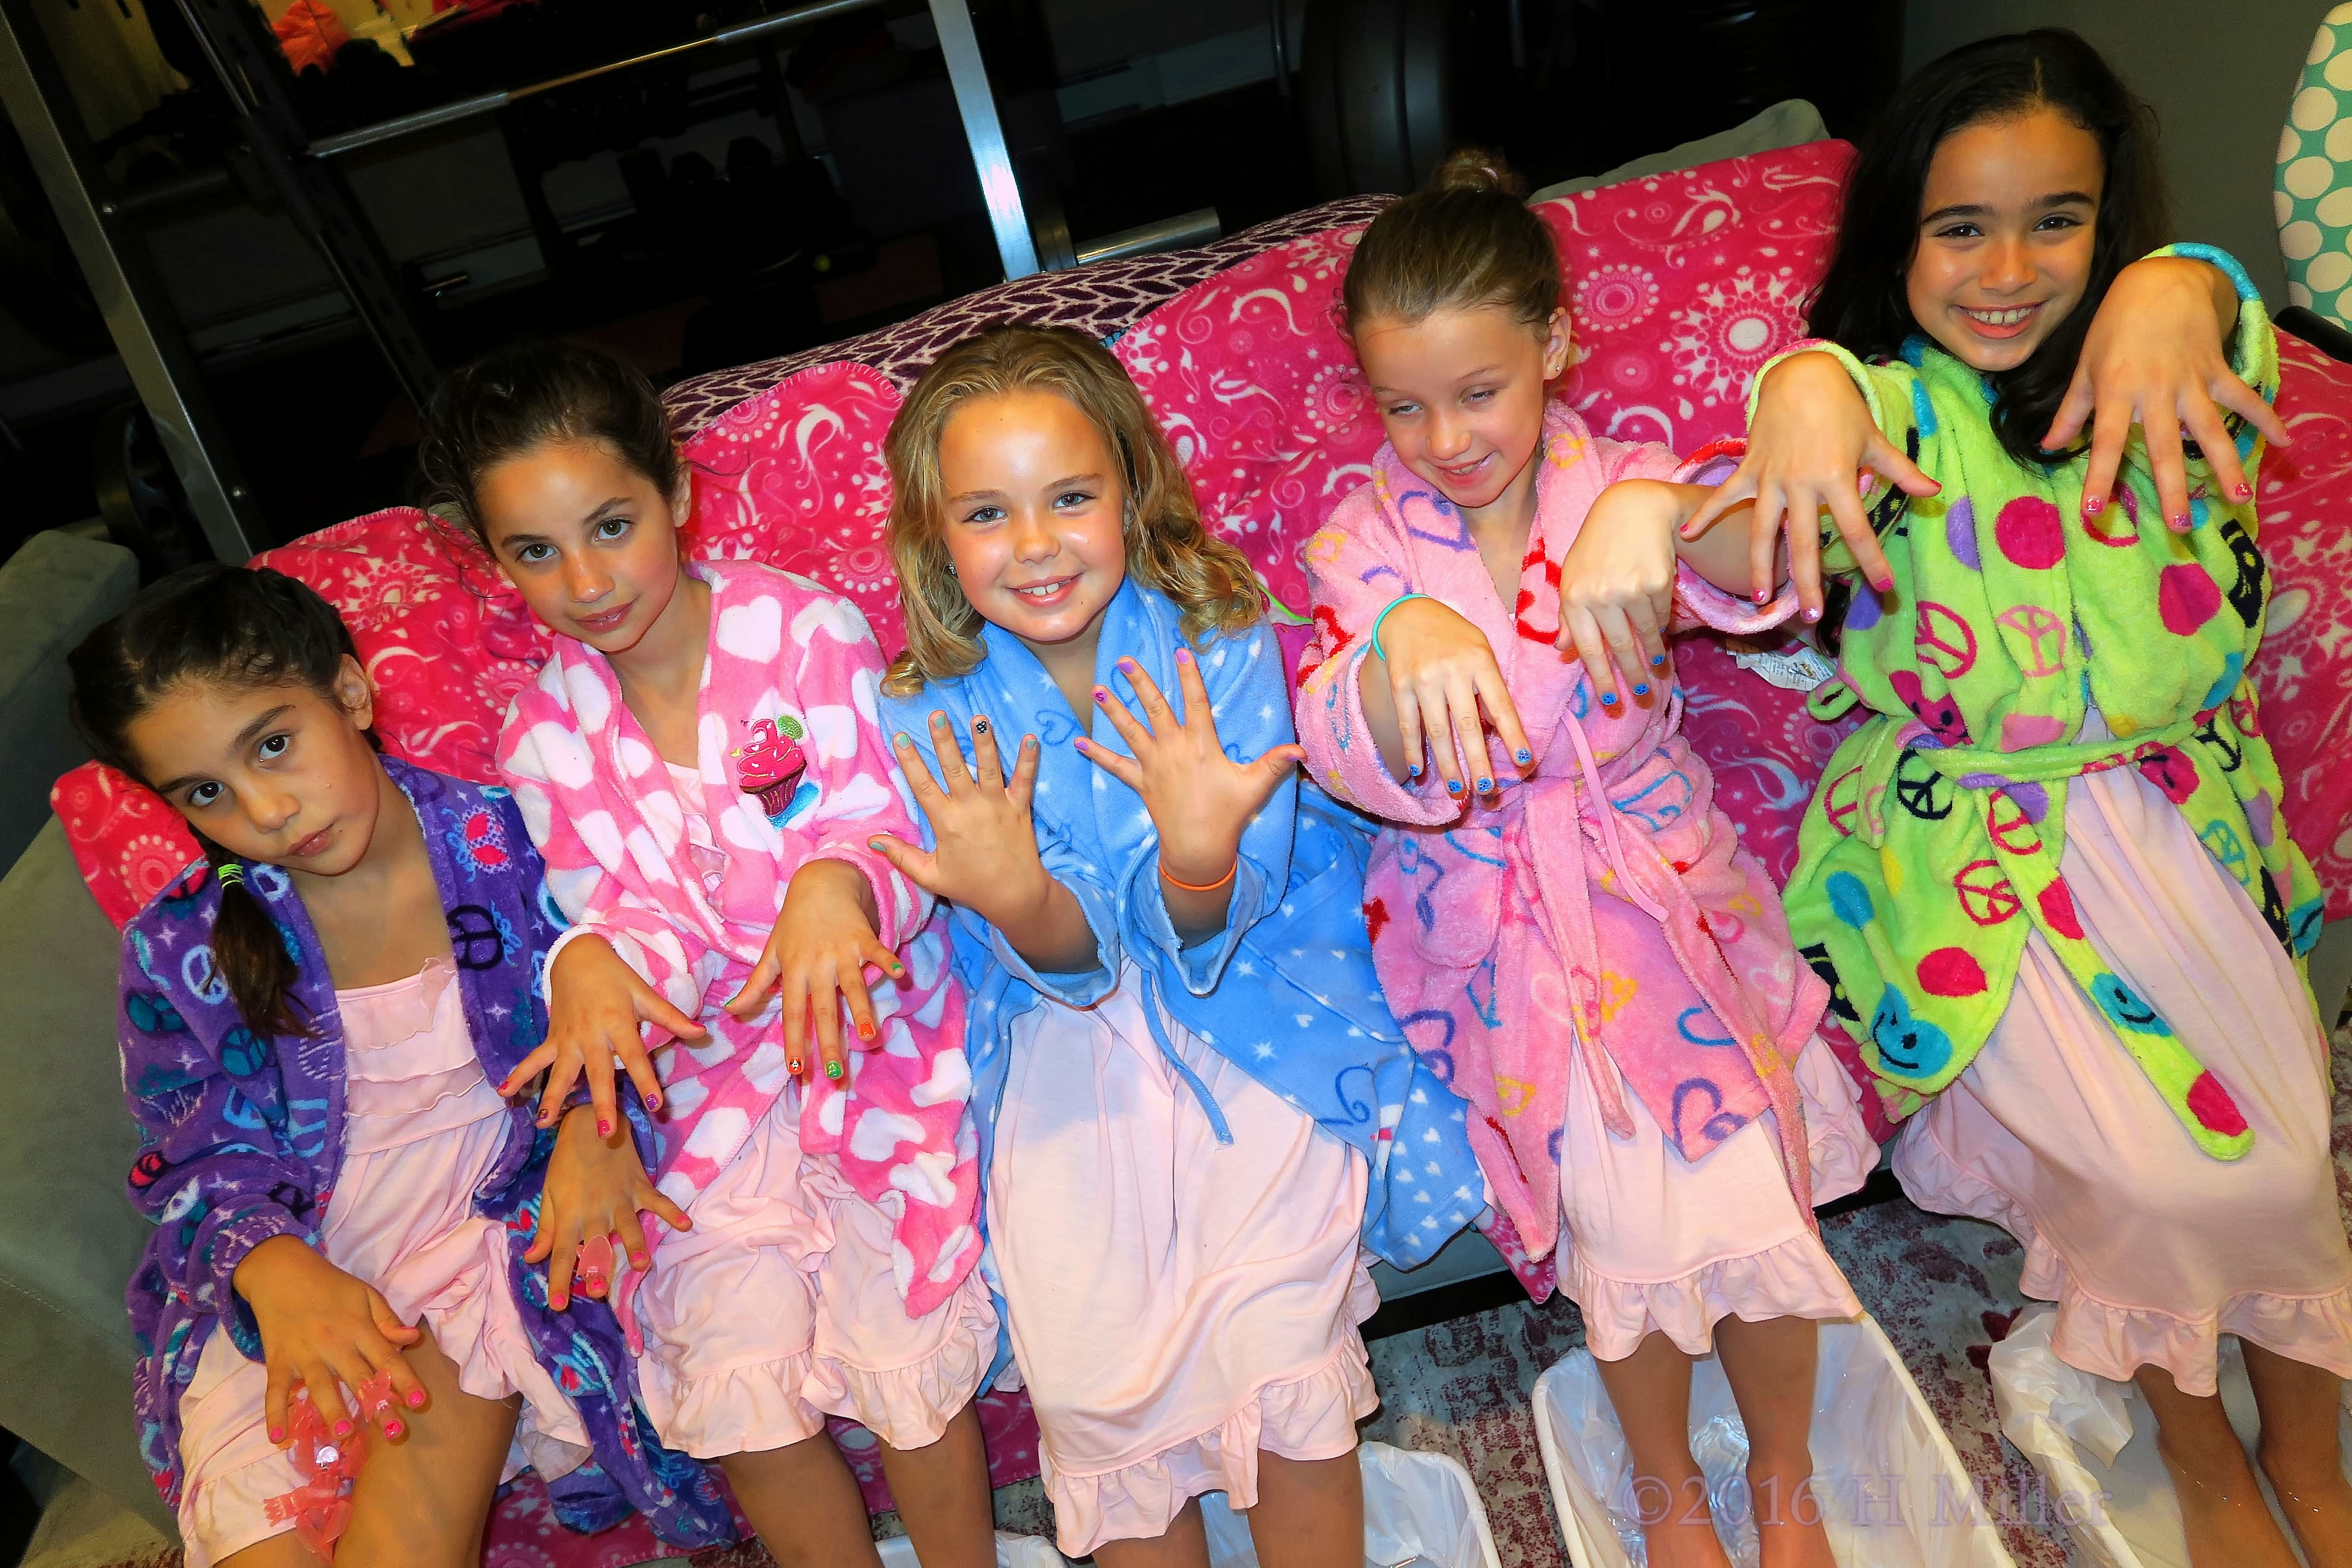 Kids Spa Party For Annual Sleepunder In New Jersey Gallery 2 